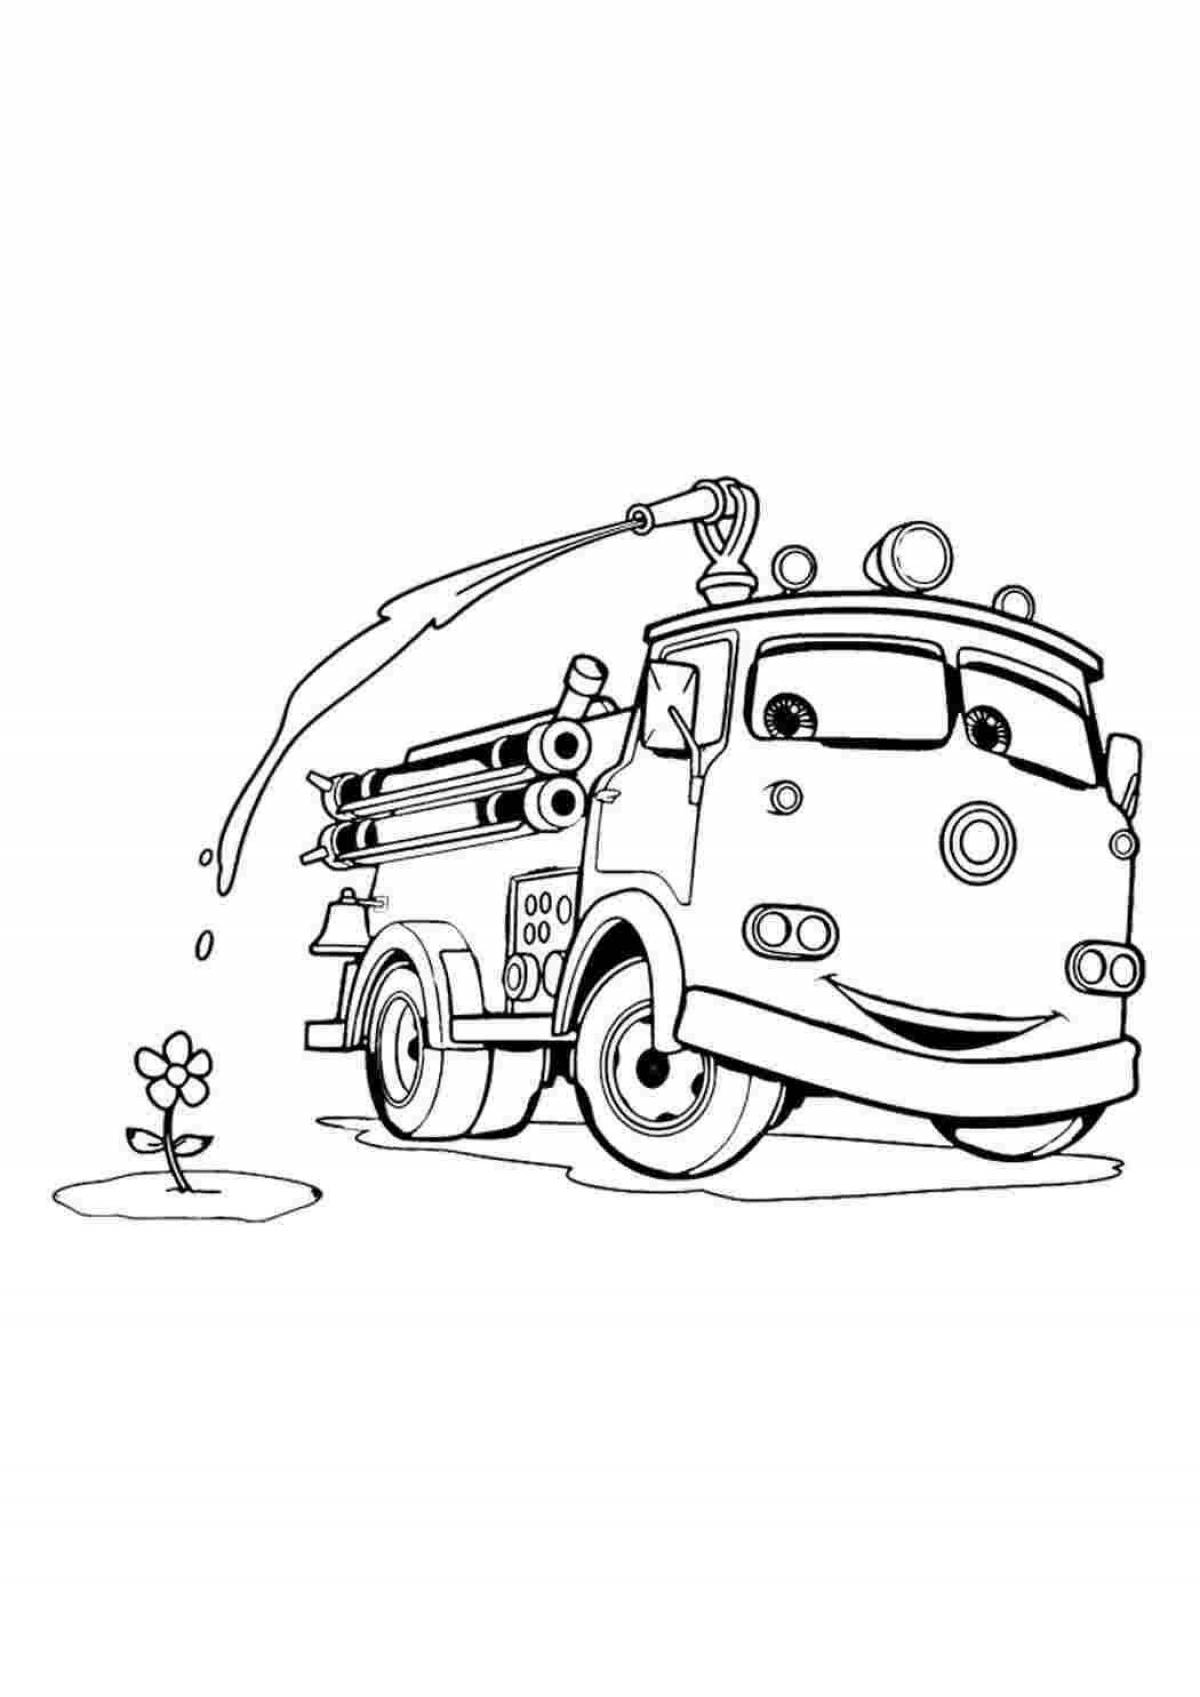 Finly's Gorgeous Firetruck coloring page